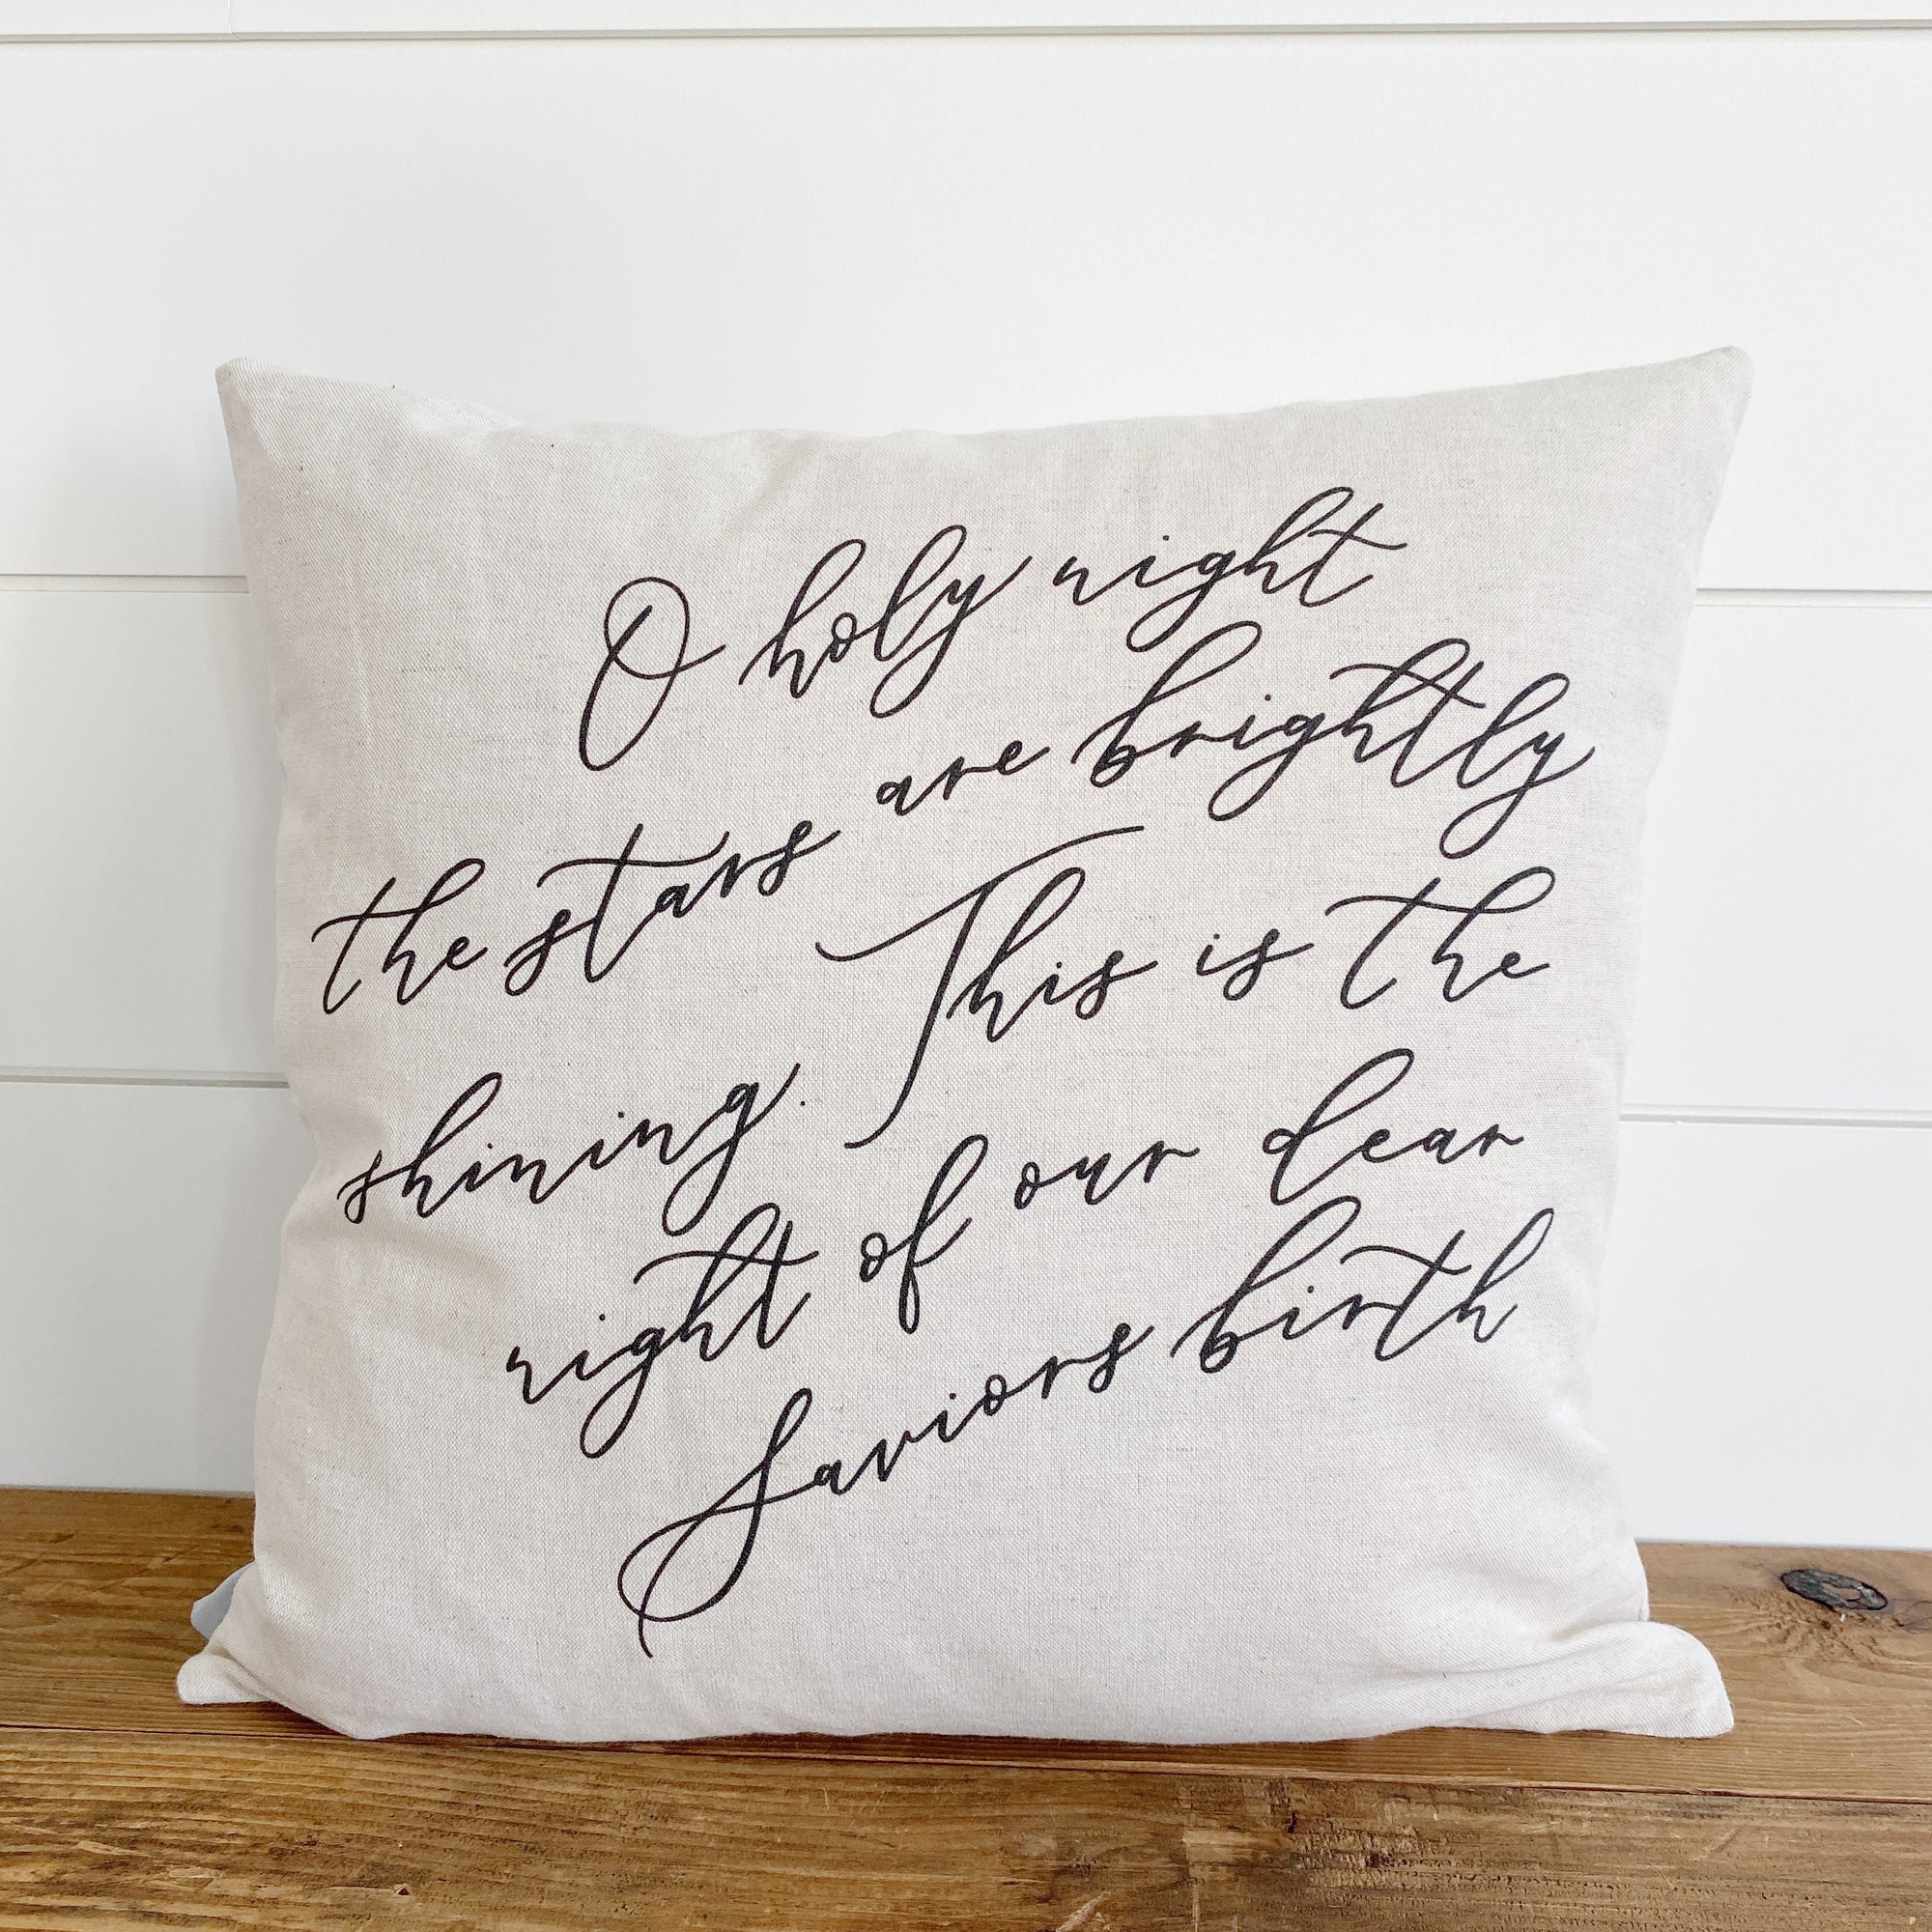 O Holy Night Calligraphy Pillow Cover - Linen and Ivory